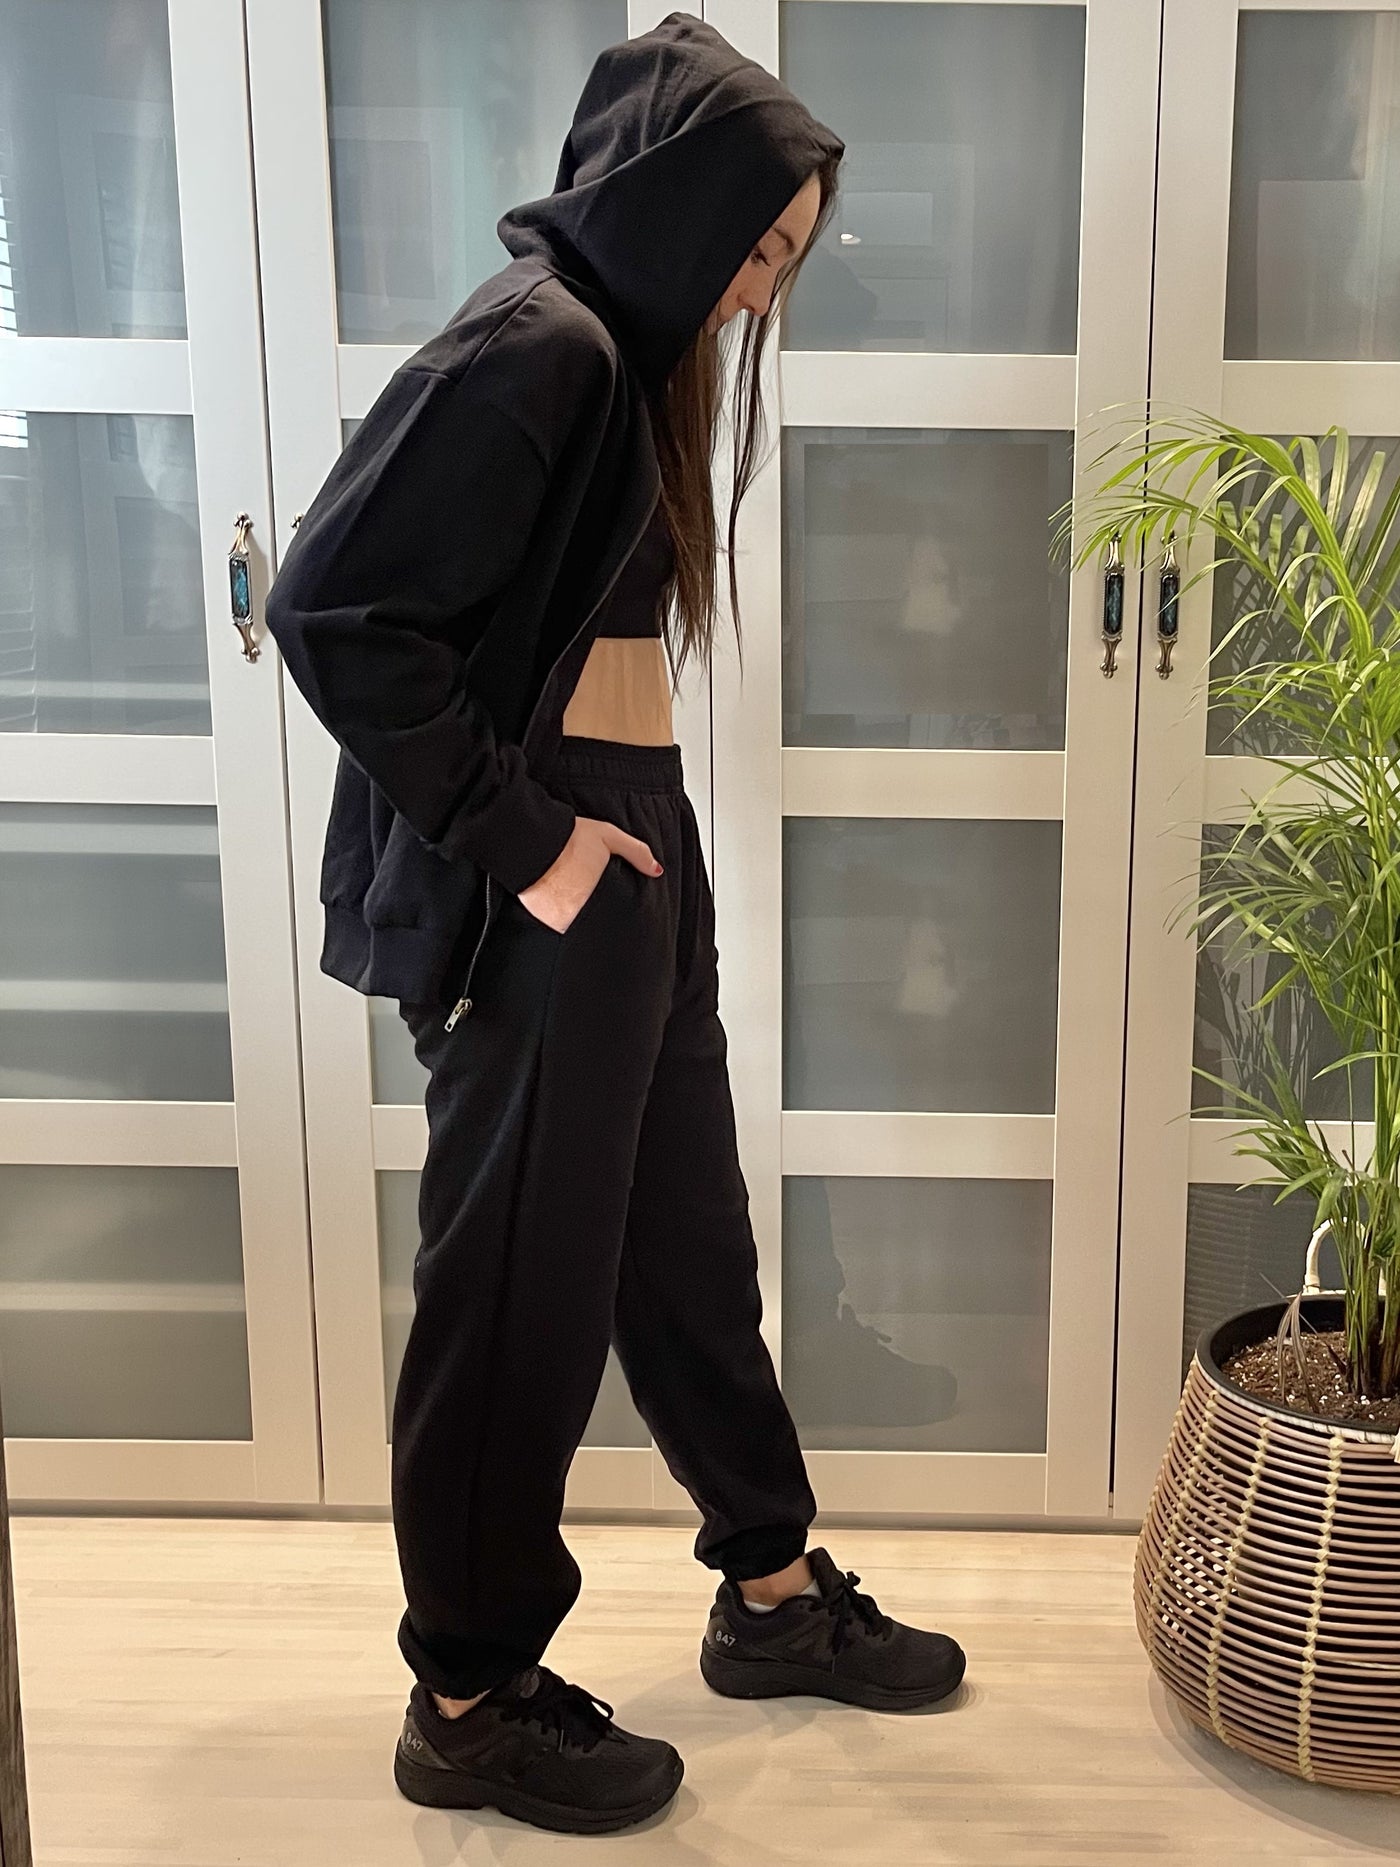 Brand: NUX | Color Block Black Premium Joggers | Style # P0279 | Made in the USA | Classy Cozy Cool Women’s Clothing Boutique | Jogging Set